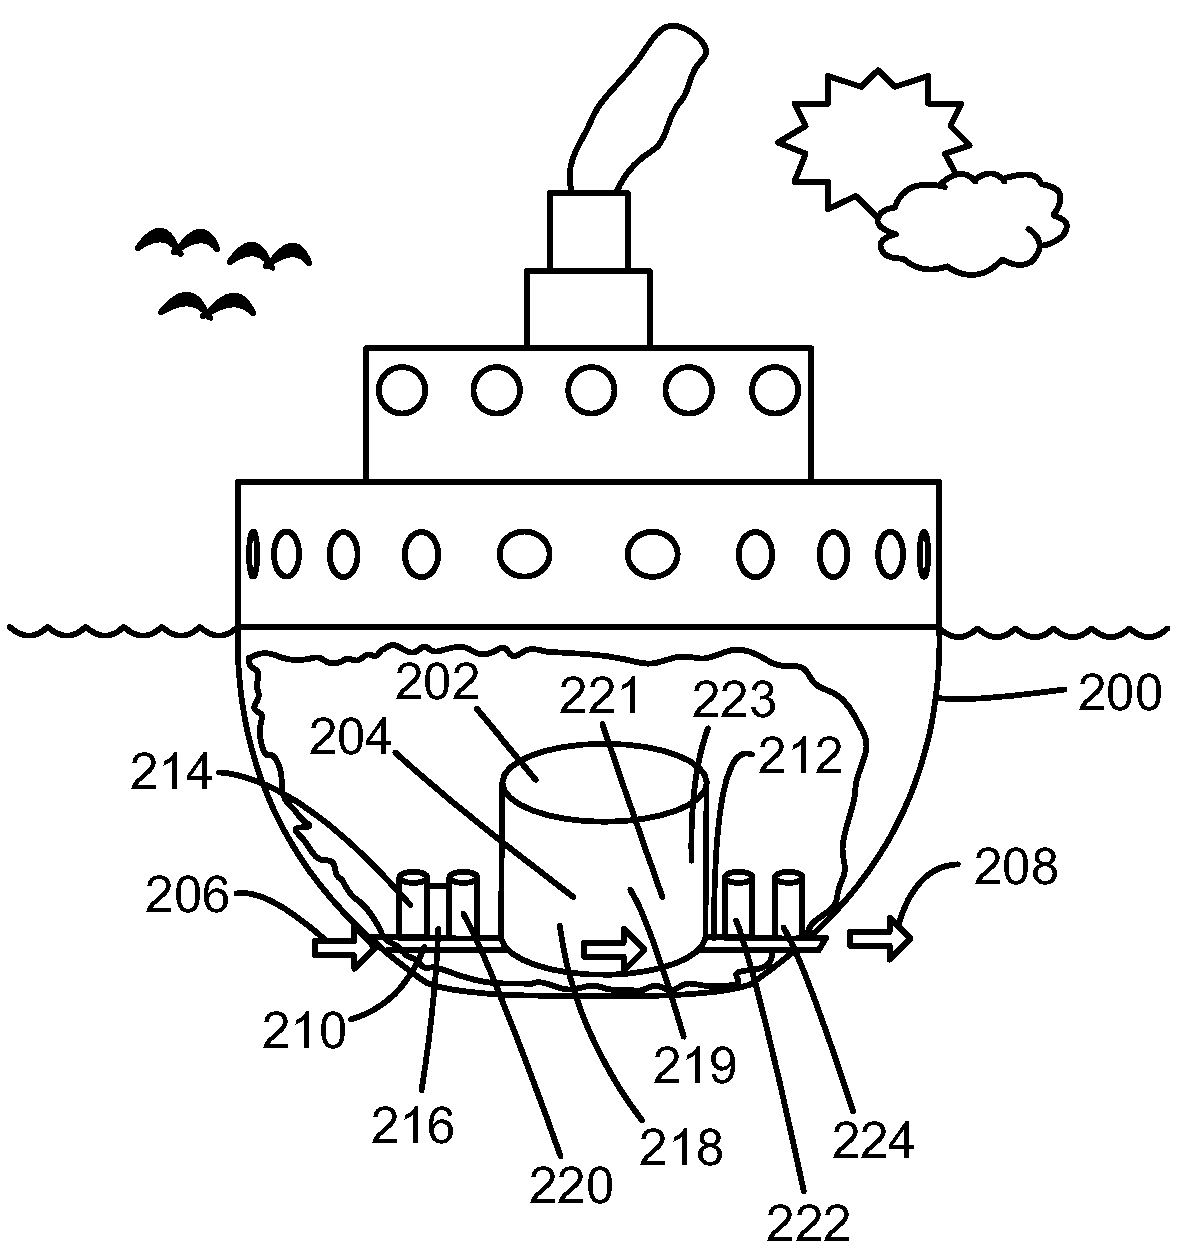 Method of treating a marine object